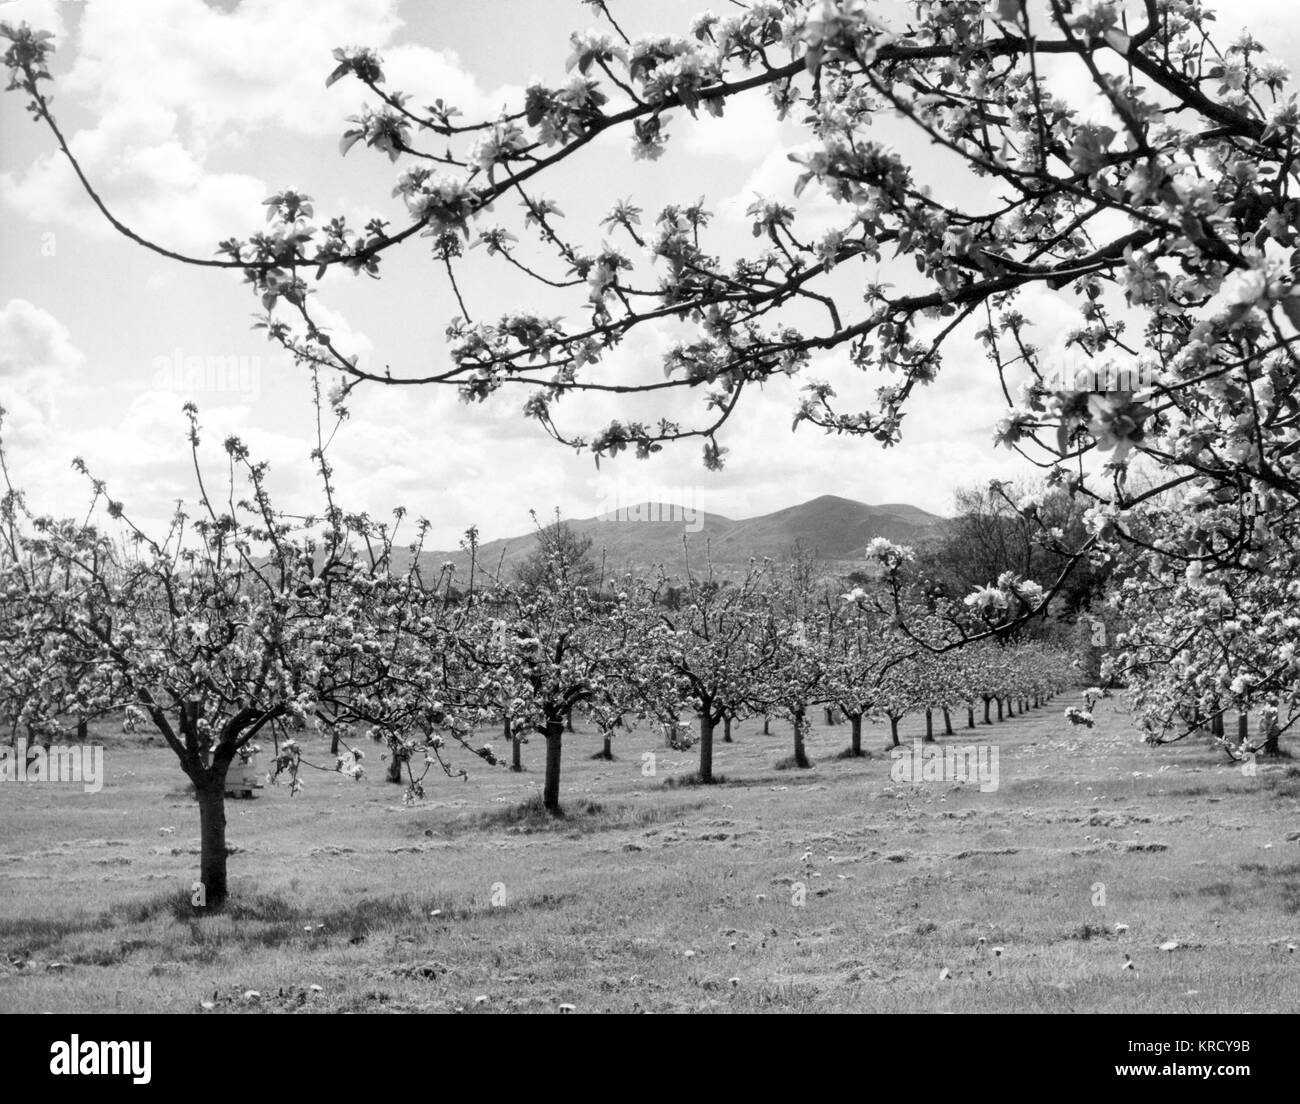 Symmetrical apple trees in  blossom in an orchard at  Powick, Malvern Hills,  Worcestershire, England.       Date: 1960s Stock Photo